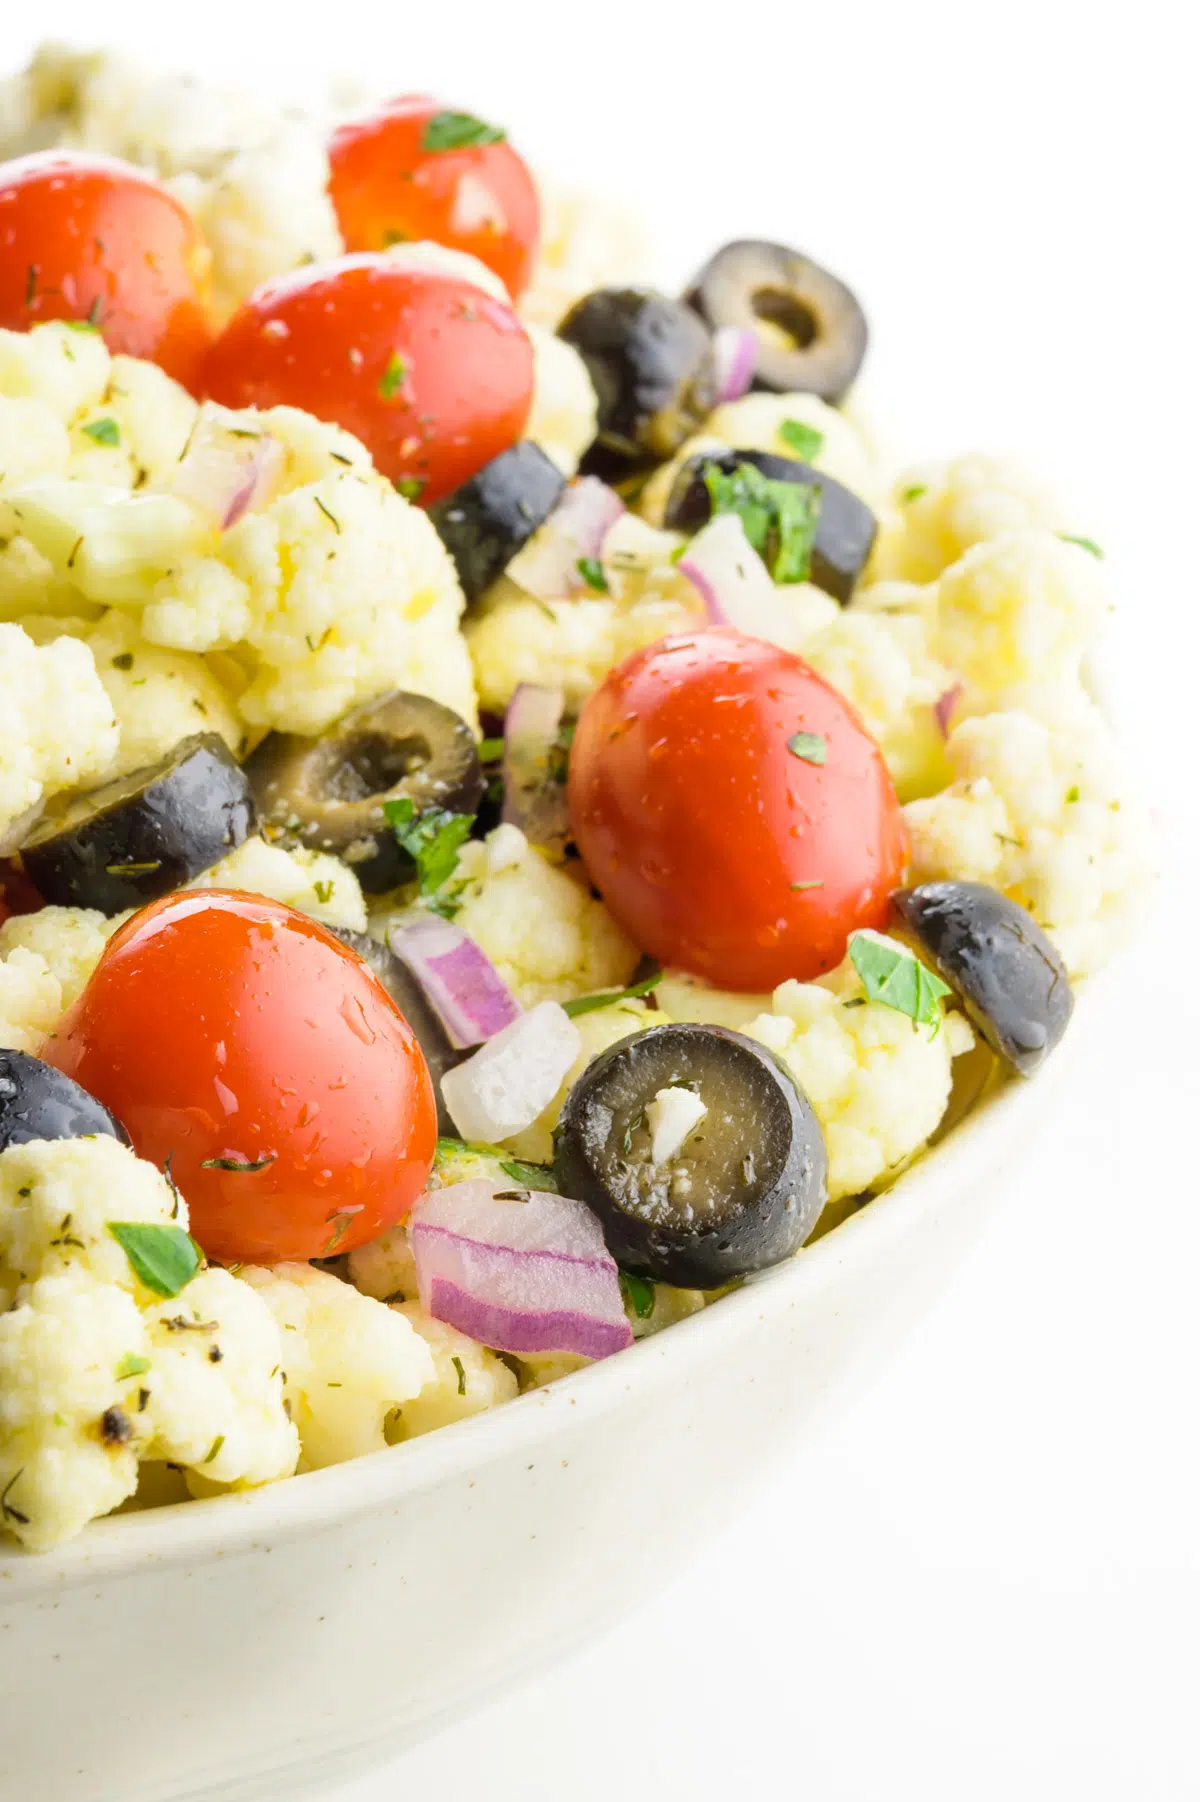 A closeup of a bowl featuring vegetables, such as cherry tomatoes, black olives, and cauliflower florets.